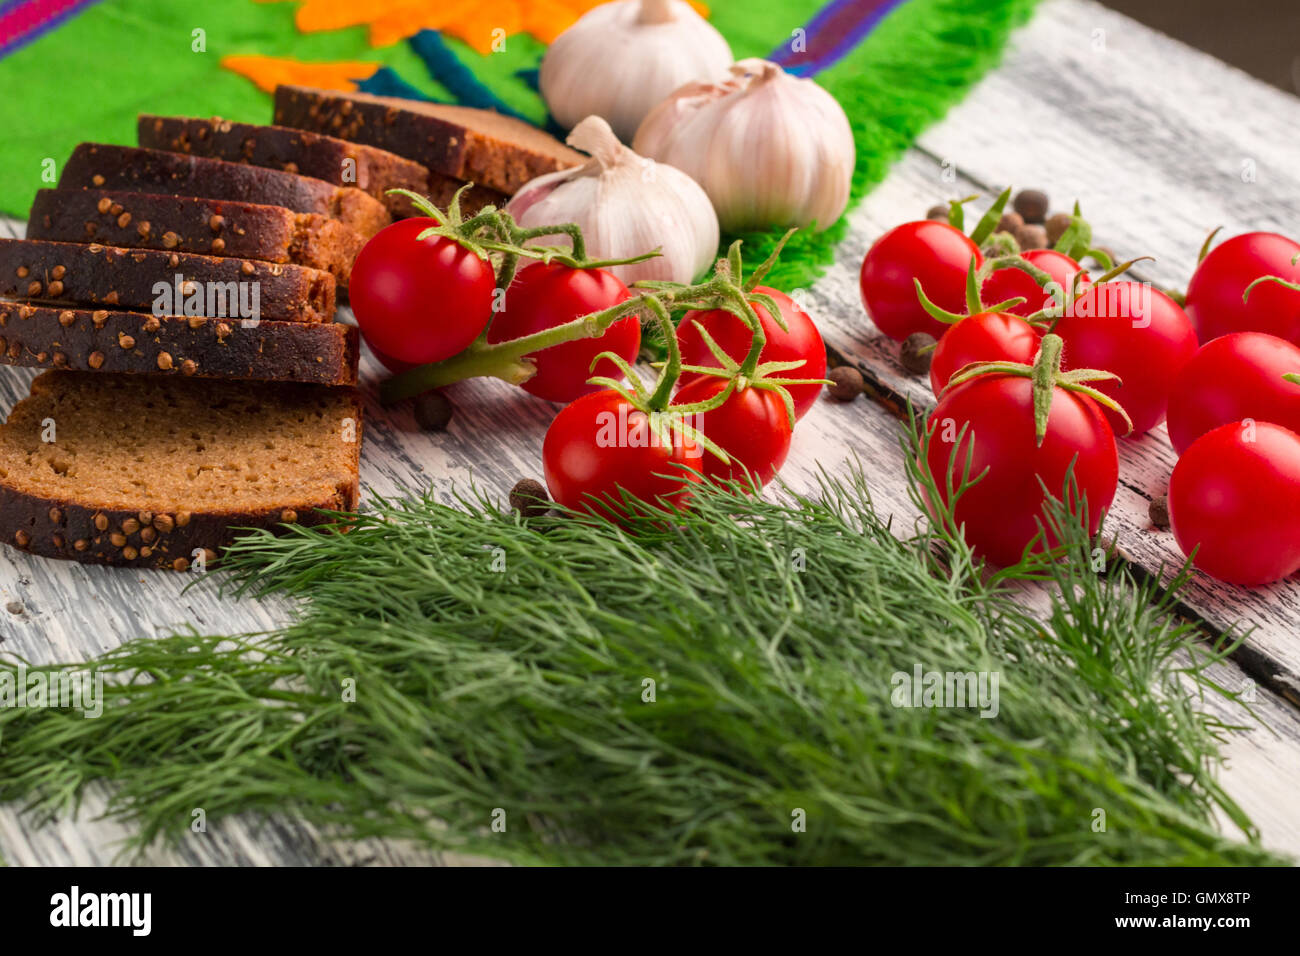 Still life on wooden background: tomatoes, black bread, garlic, fennel, bayberry pepper Stock Photo